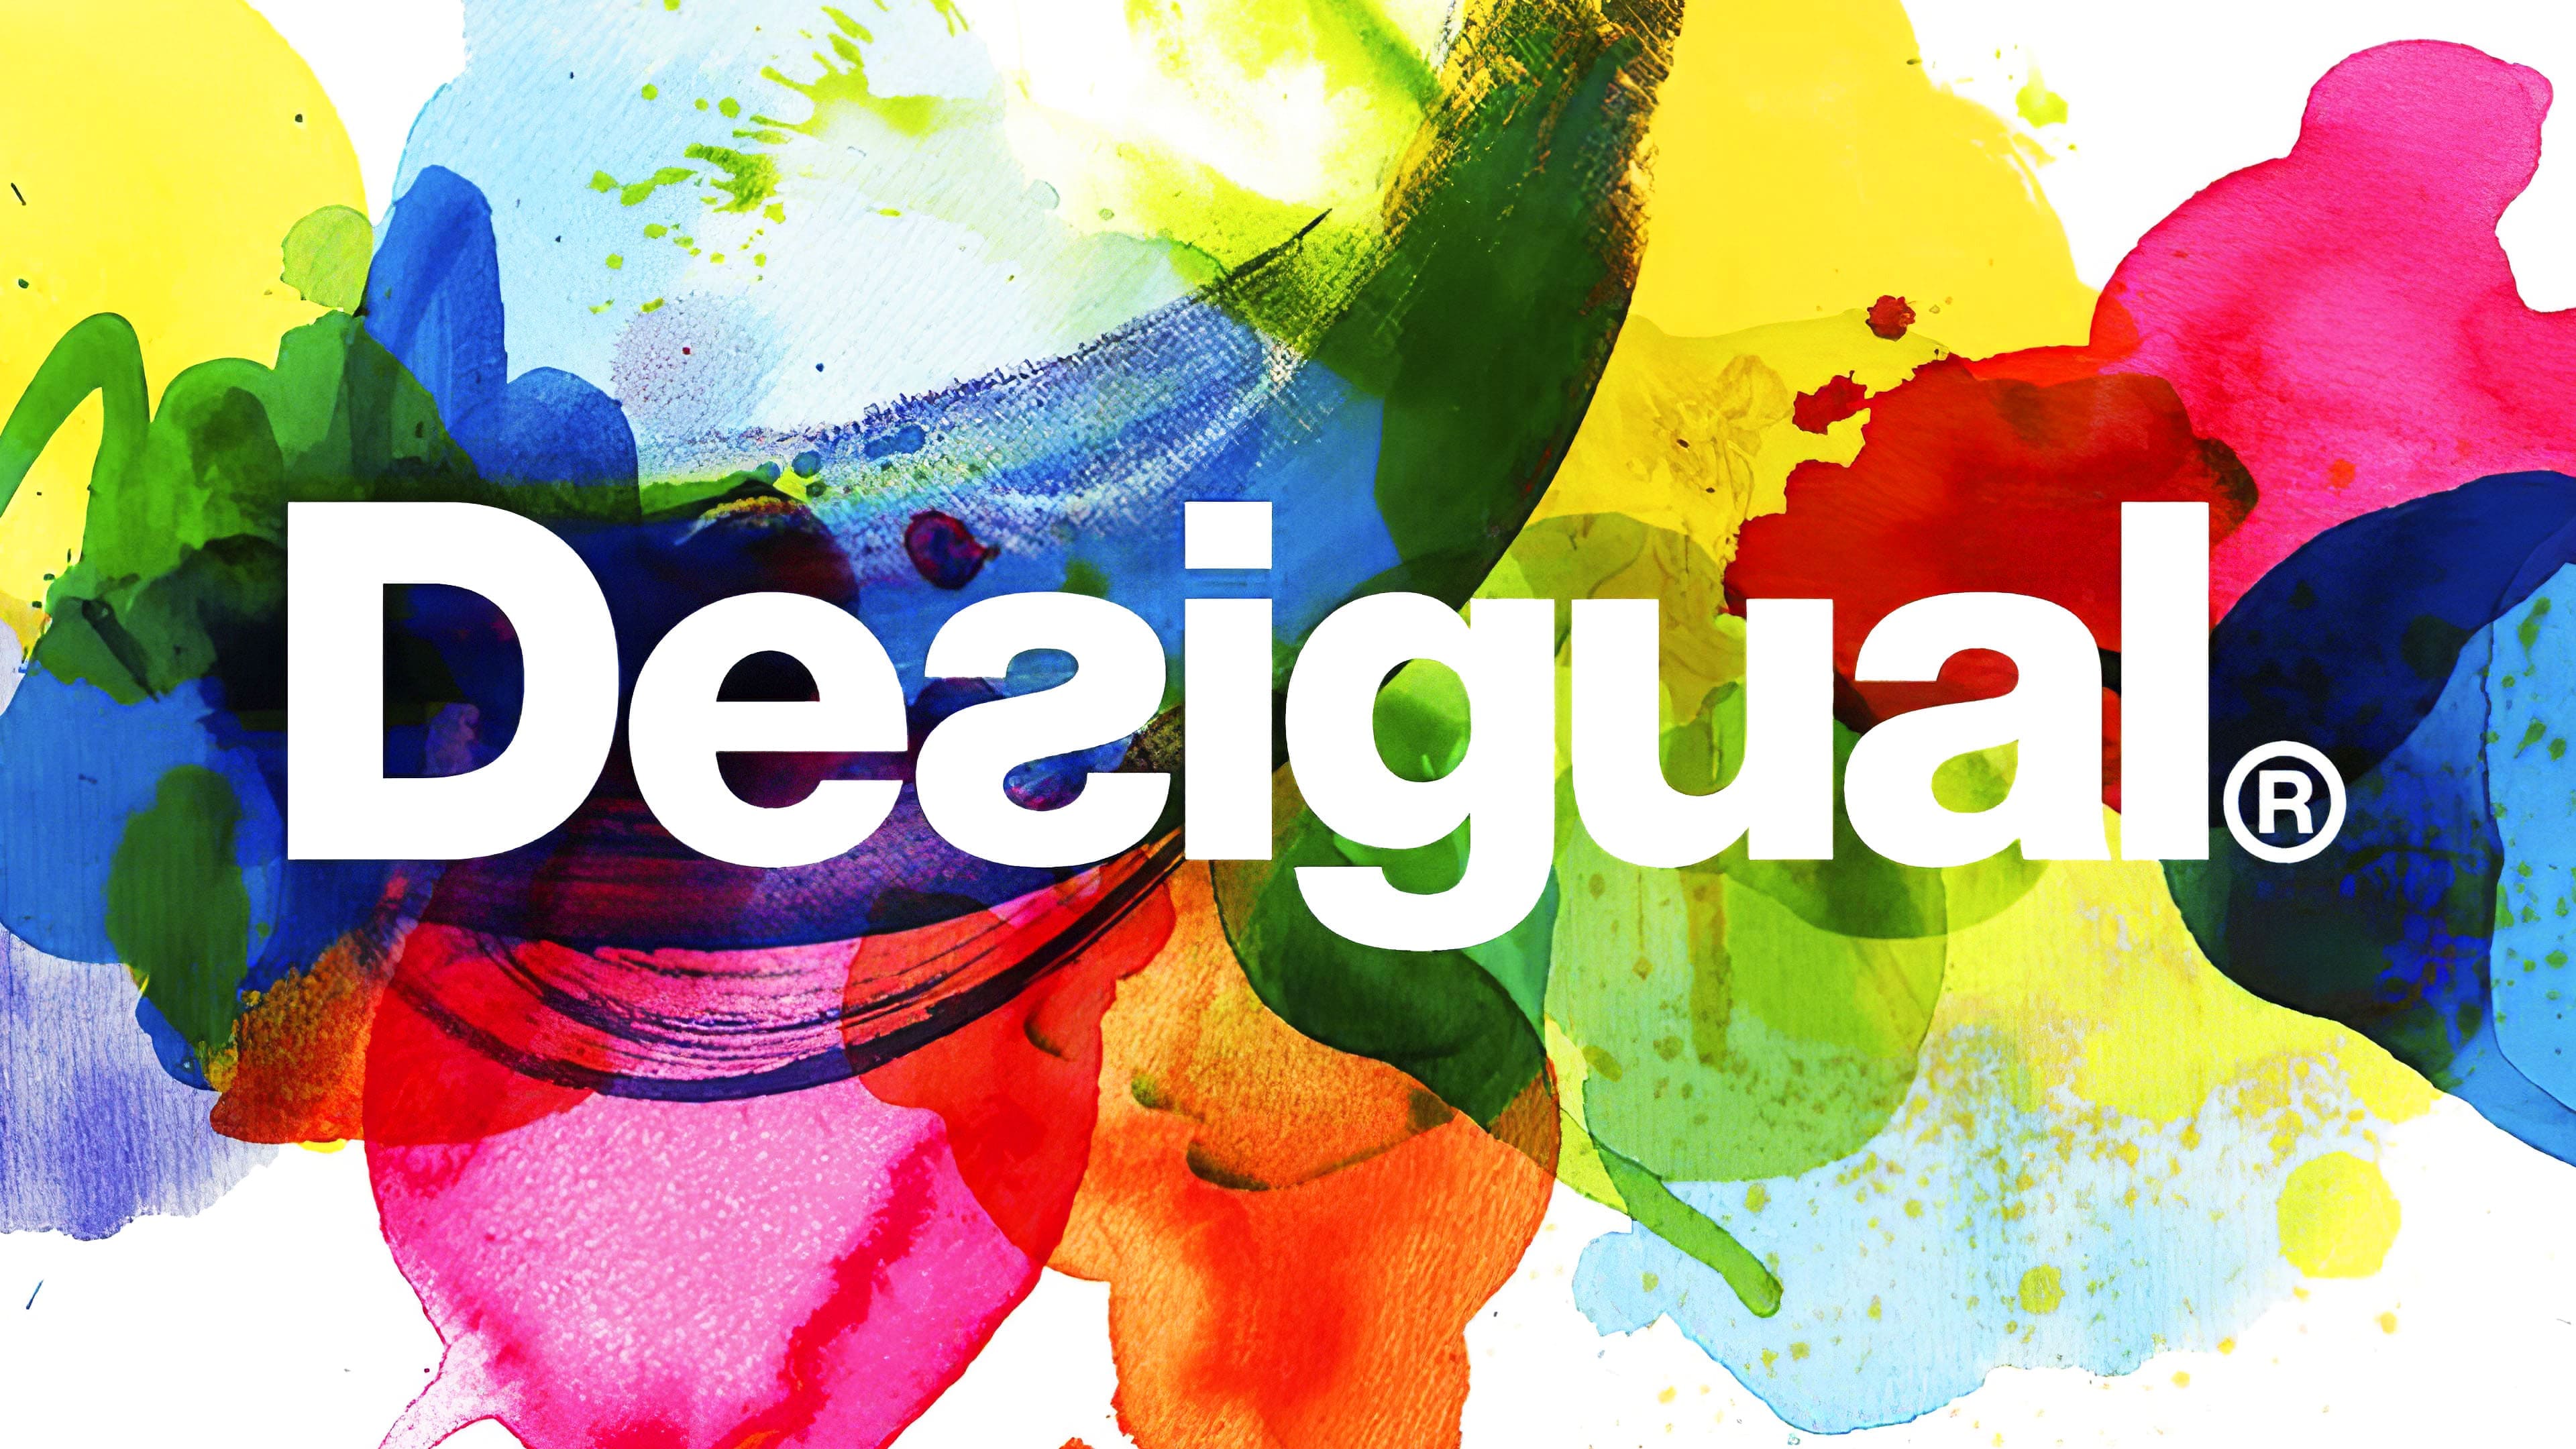 Desigual Logo The Most Famous Brands And Company Logos In The World